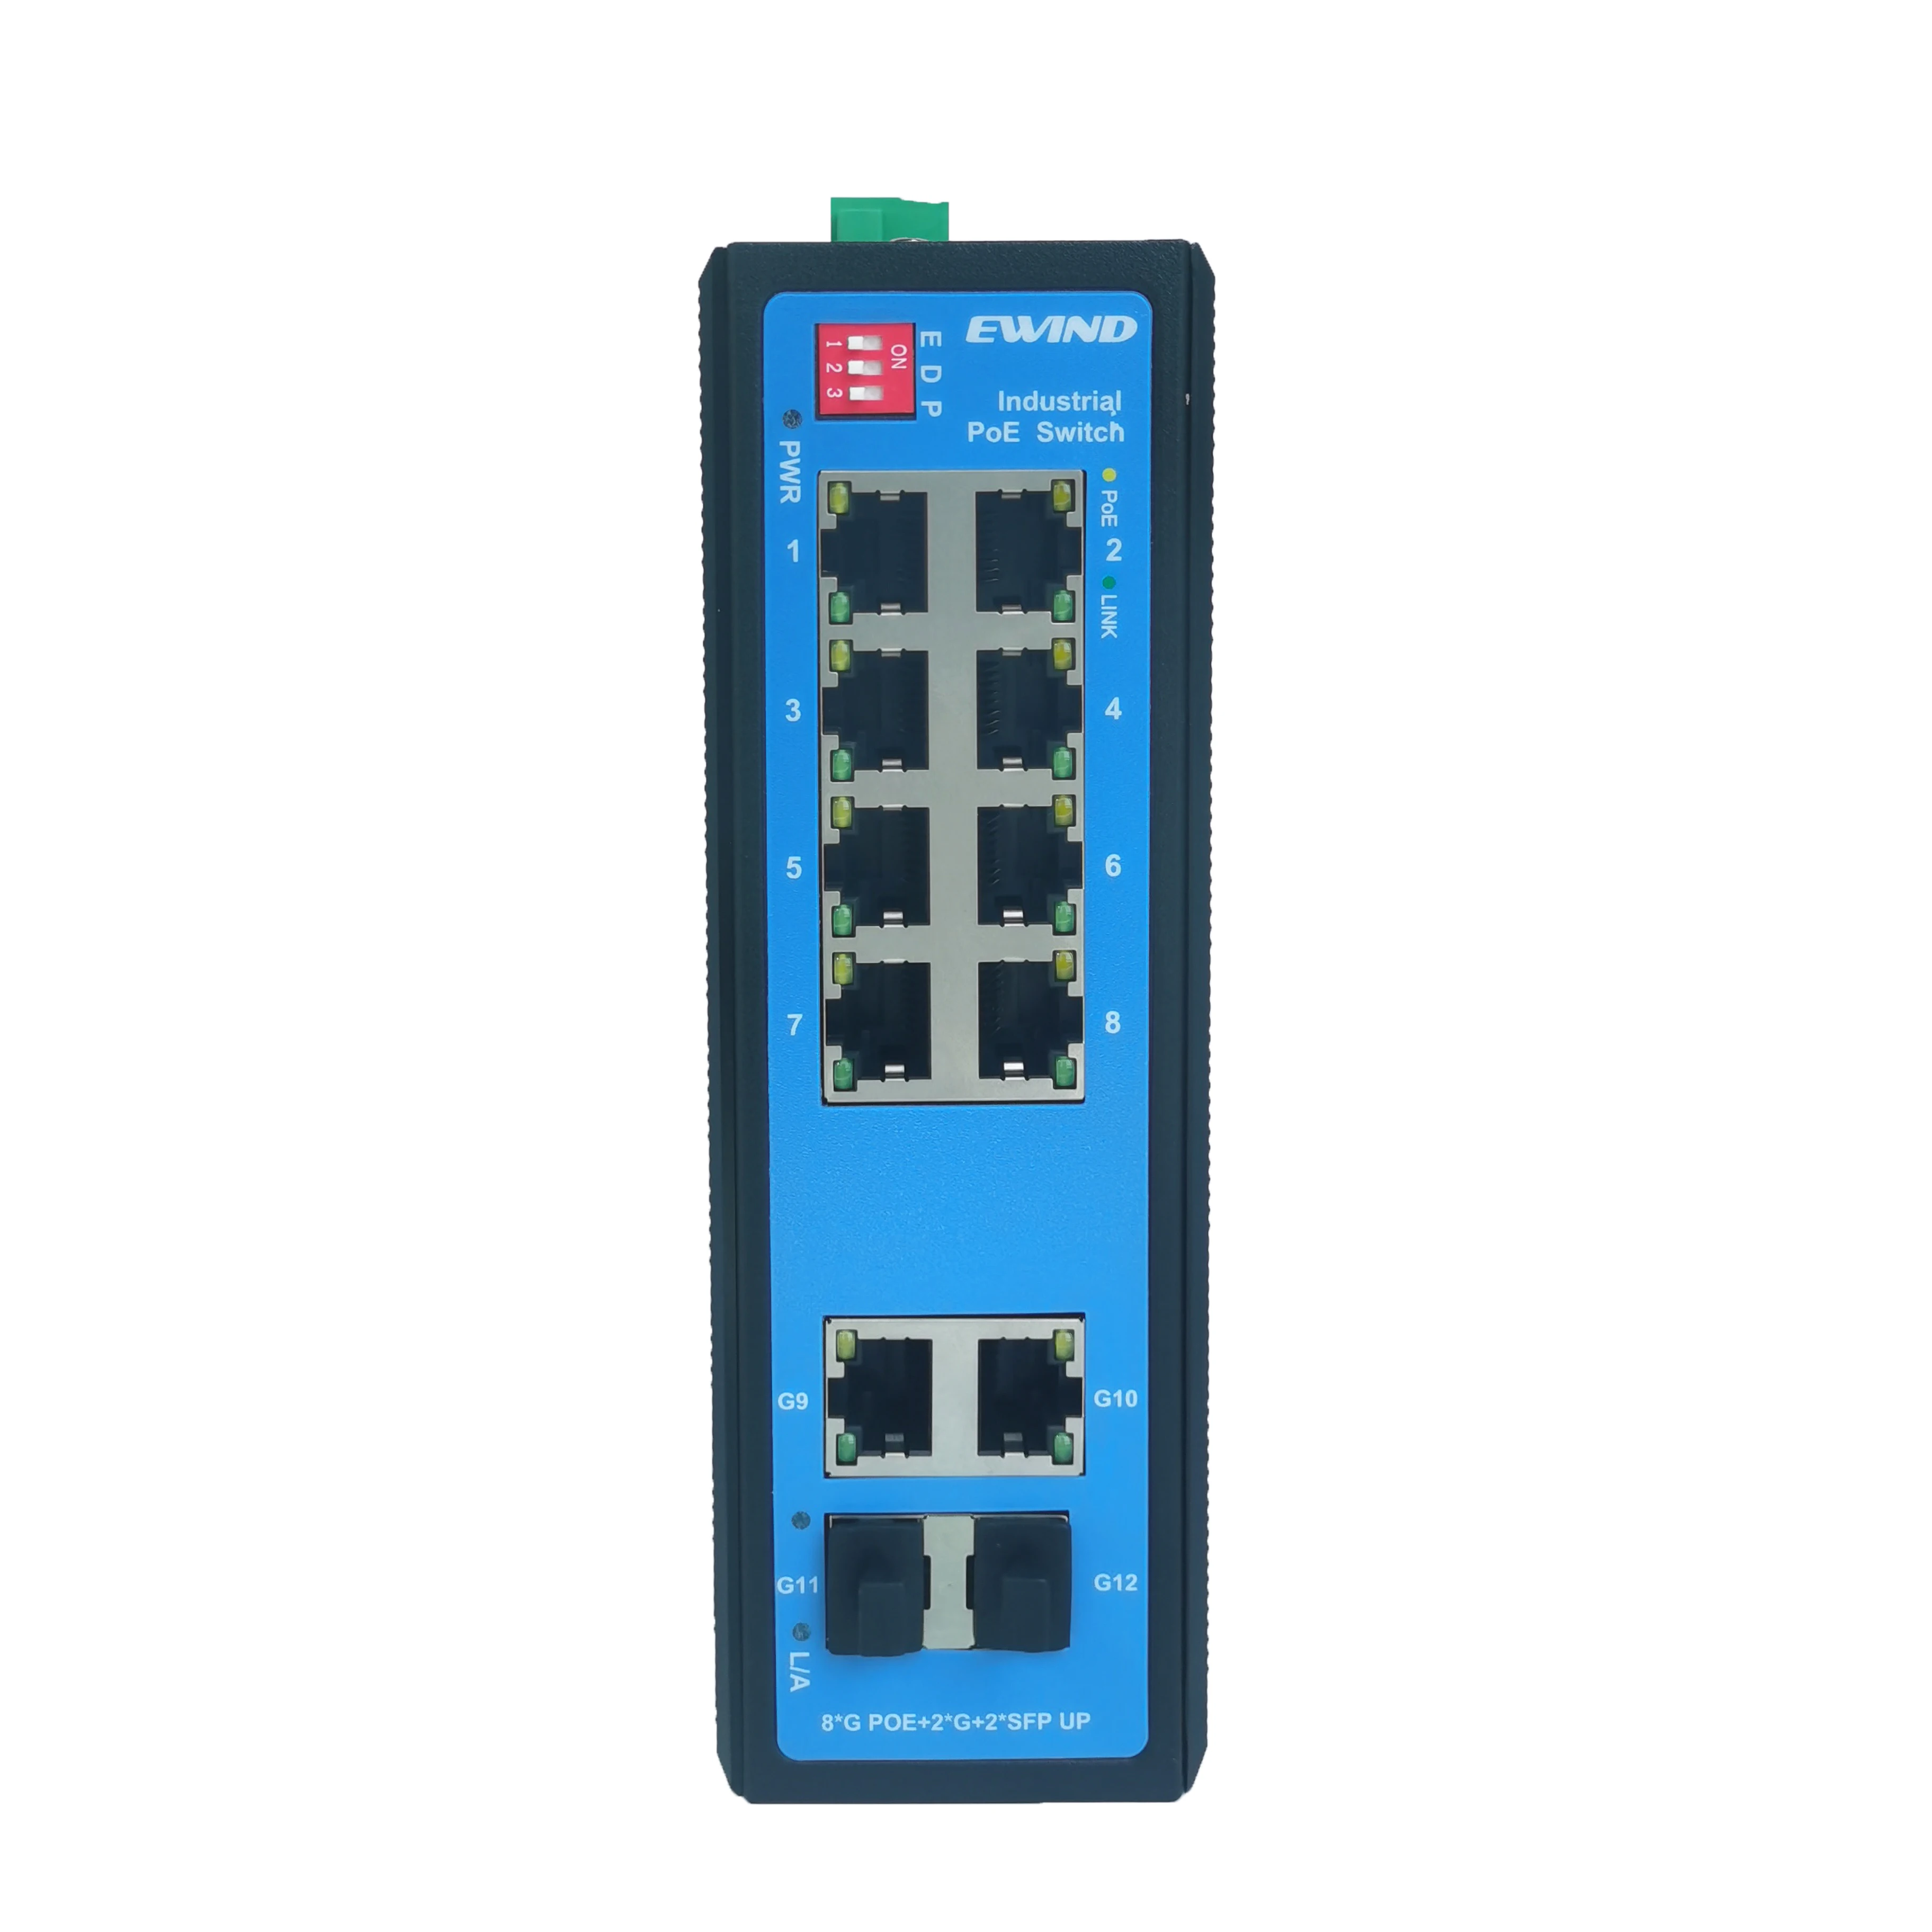 

EW-PIS1812-8GE Unmanaged Combo Ethernet Switch Module 1000mbps Industrial Gigabit 8 Port CCTV POE Switch